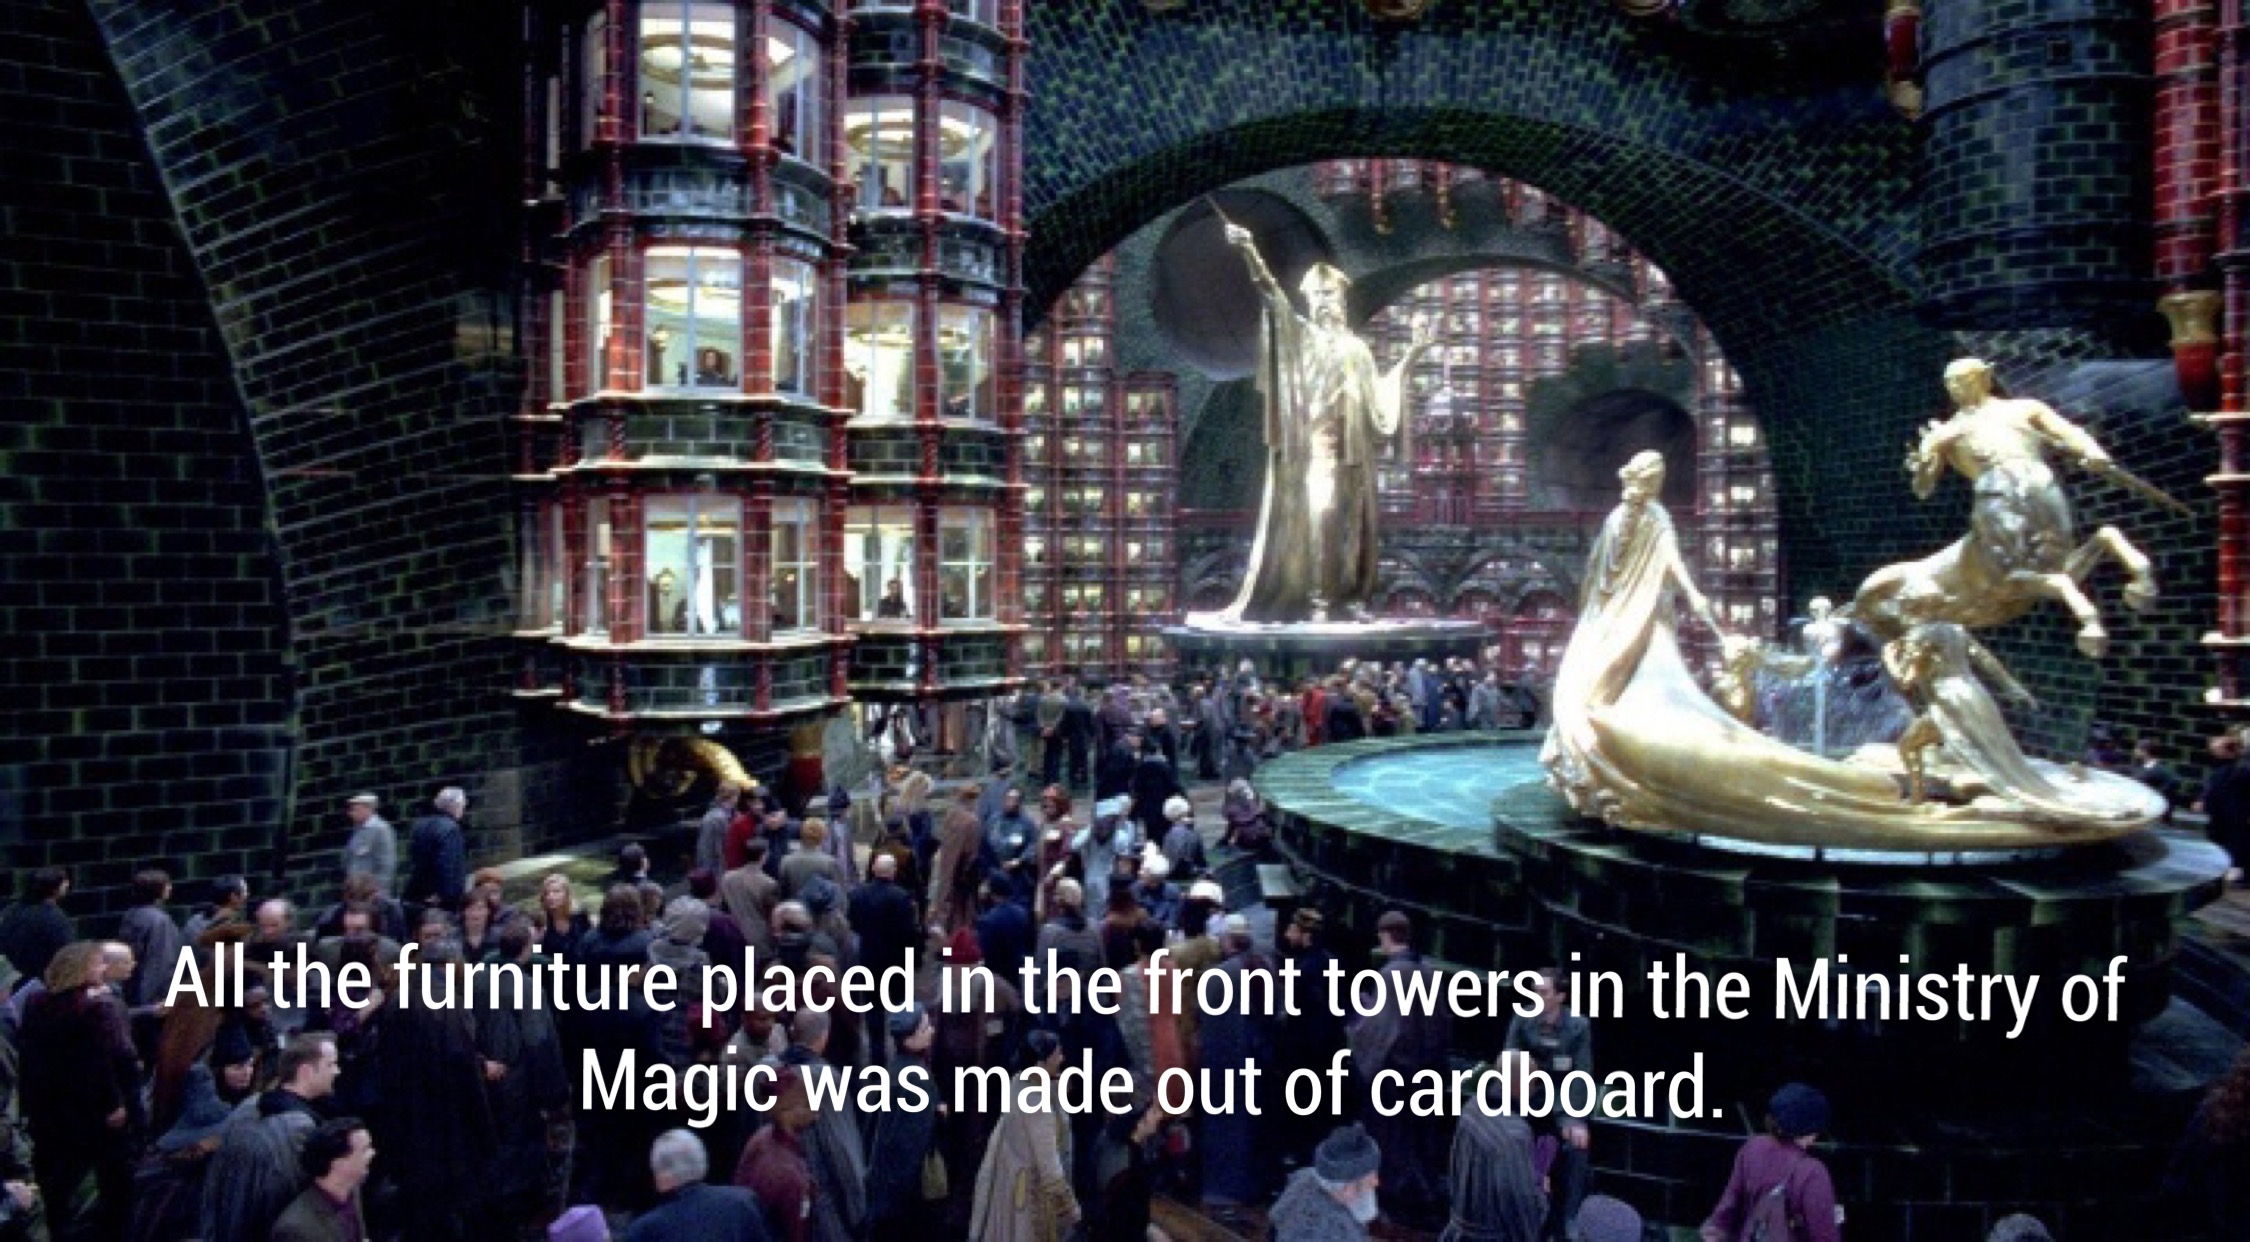 ministry of magic - All the furniture placed in the front towers in the Ministry of Magic was made out of cardboard.